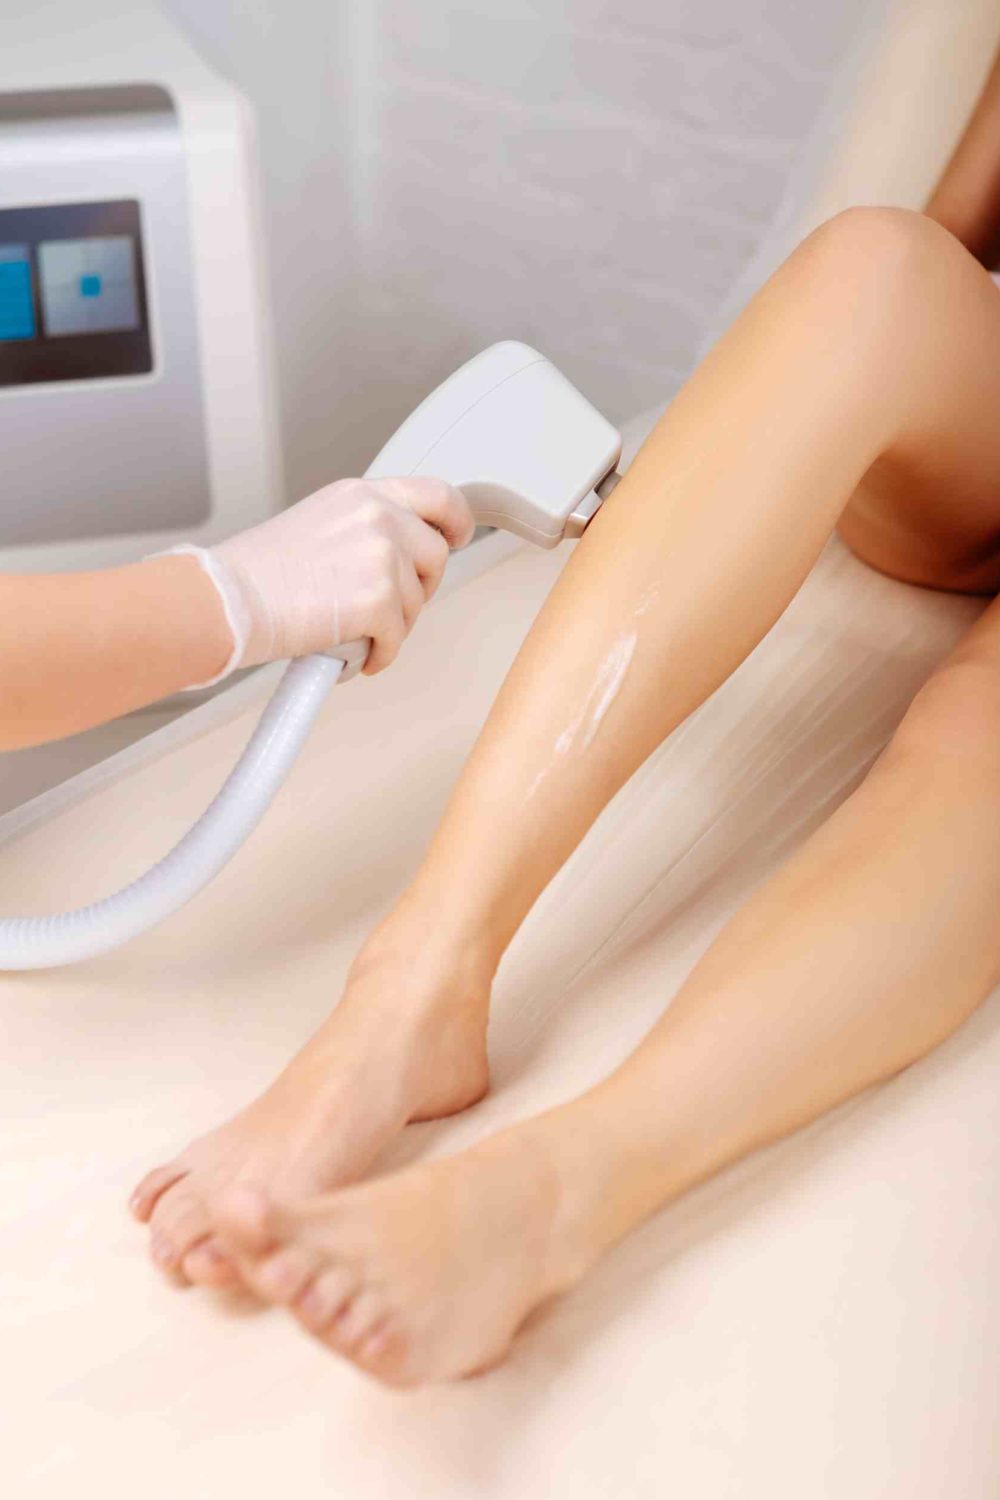 Preparation Guide: Important Facts About Laser Hair Removal